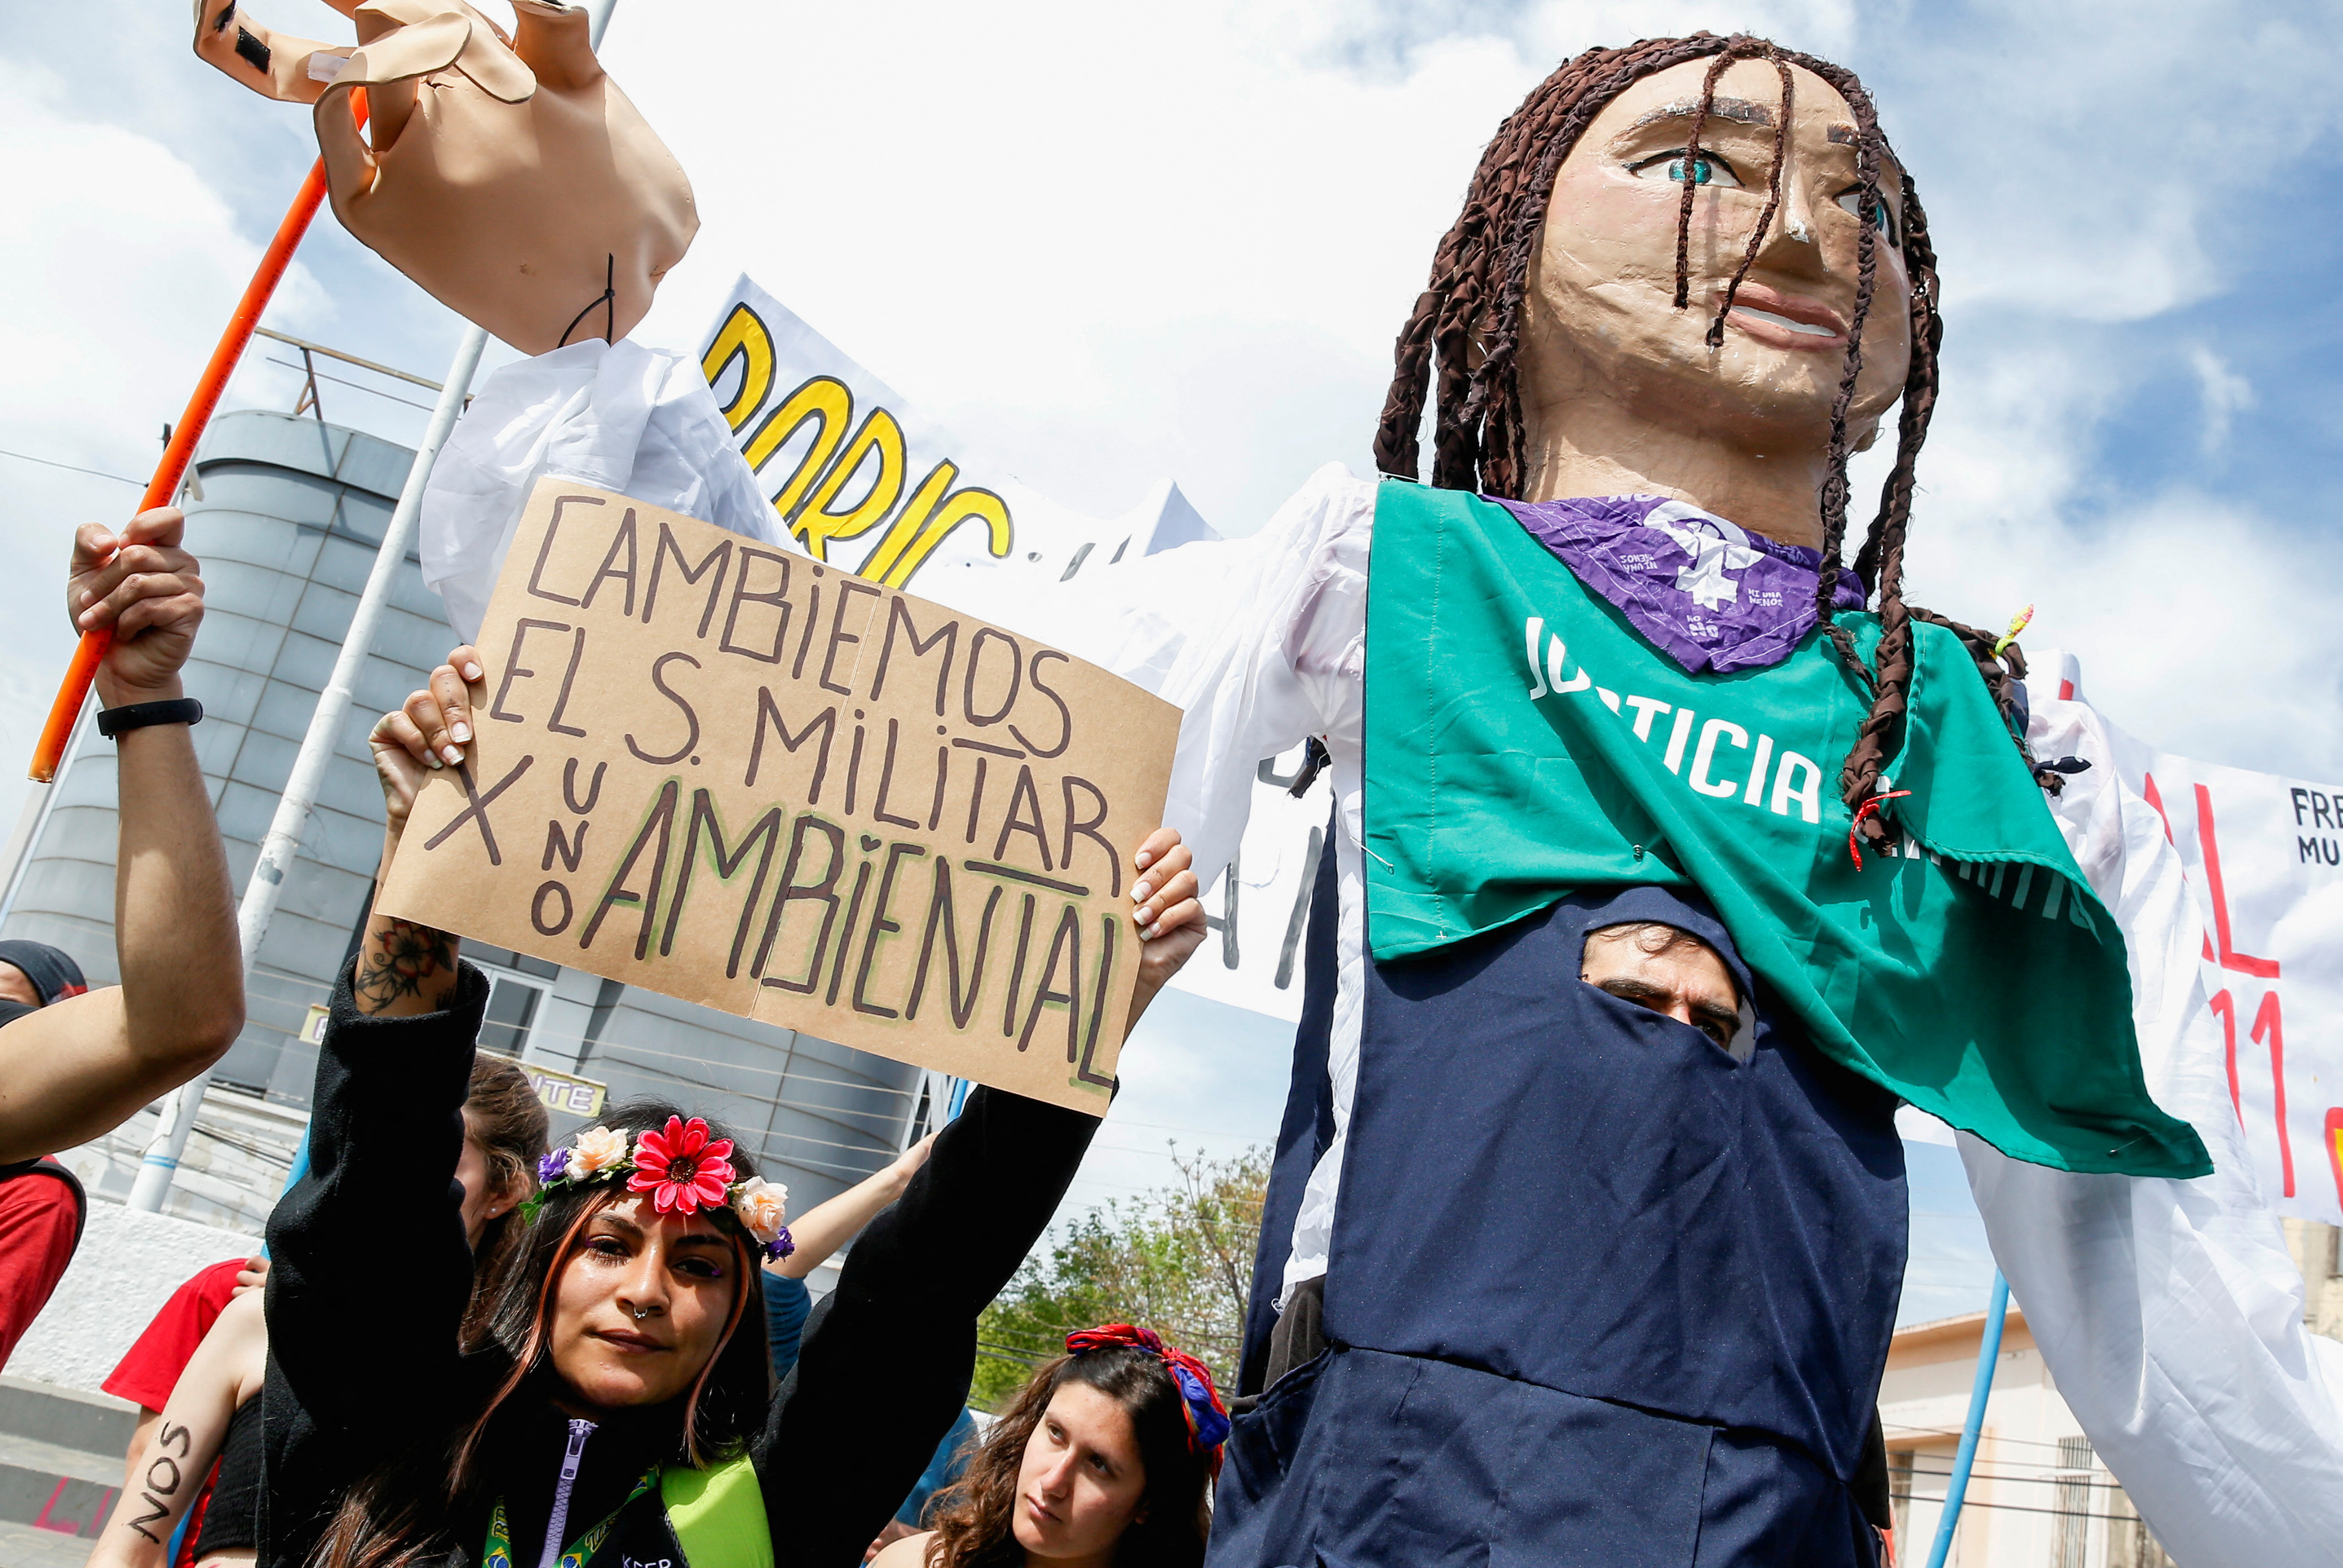 Protest against climate change called by the organization Fridays For Future, in Valparaiso